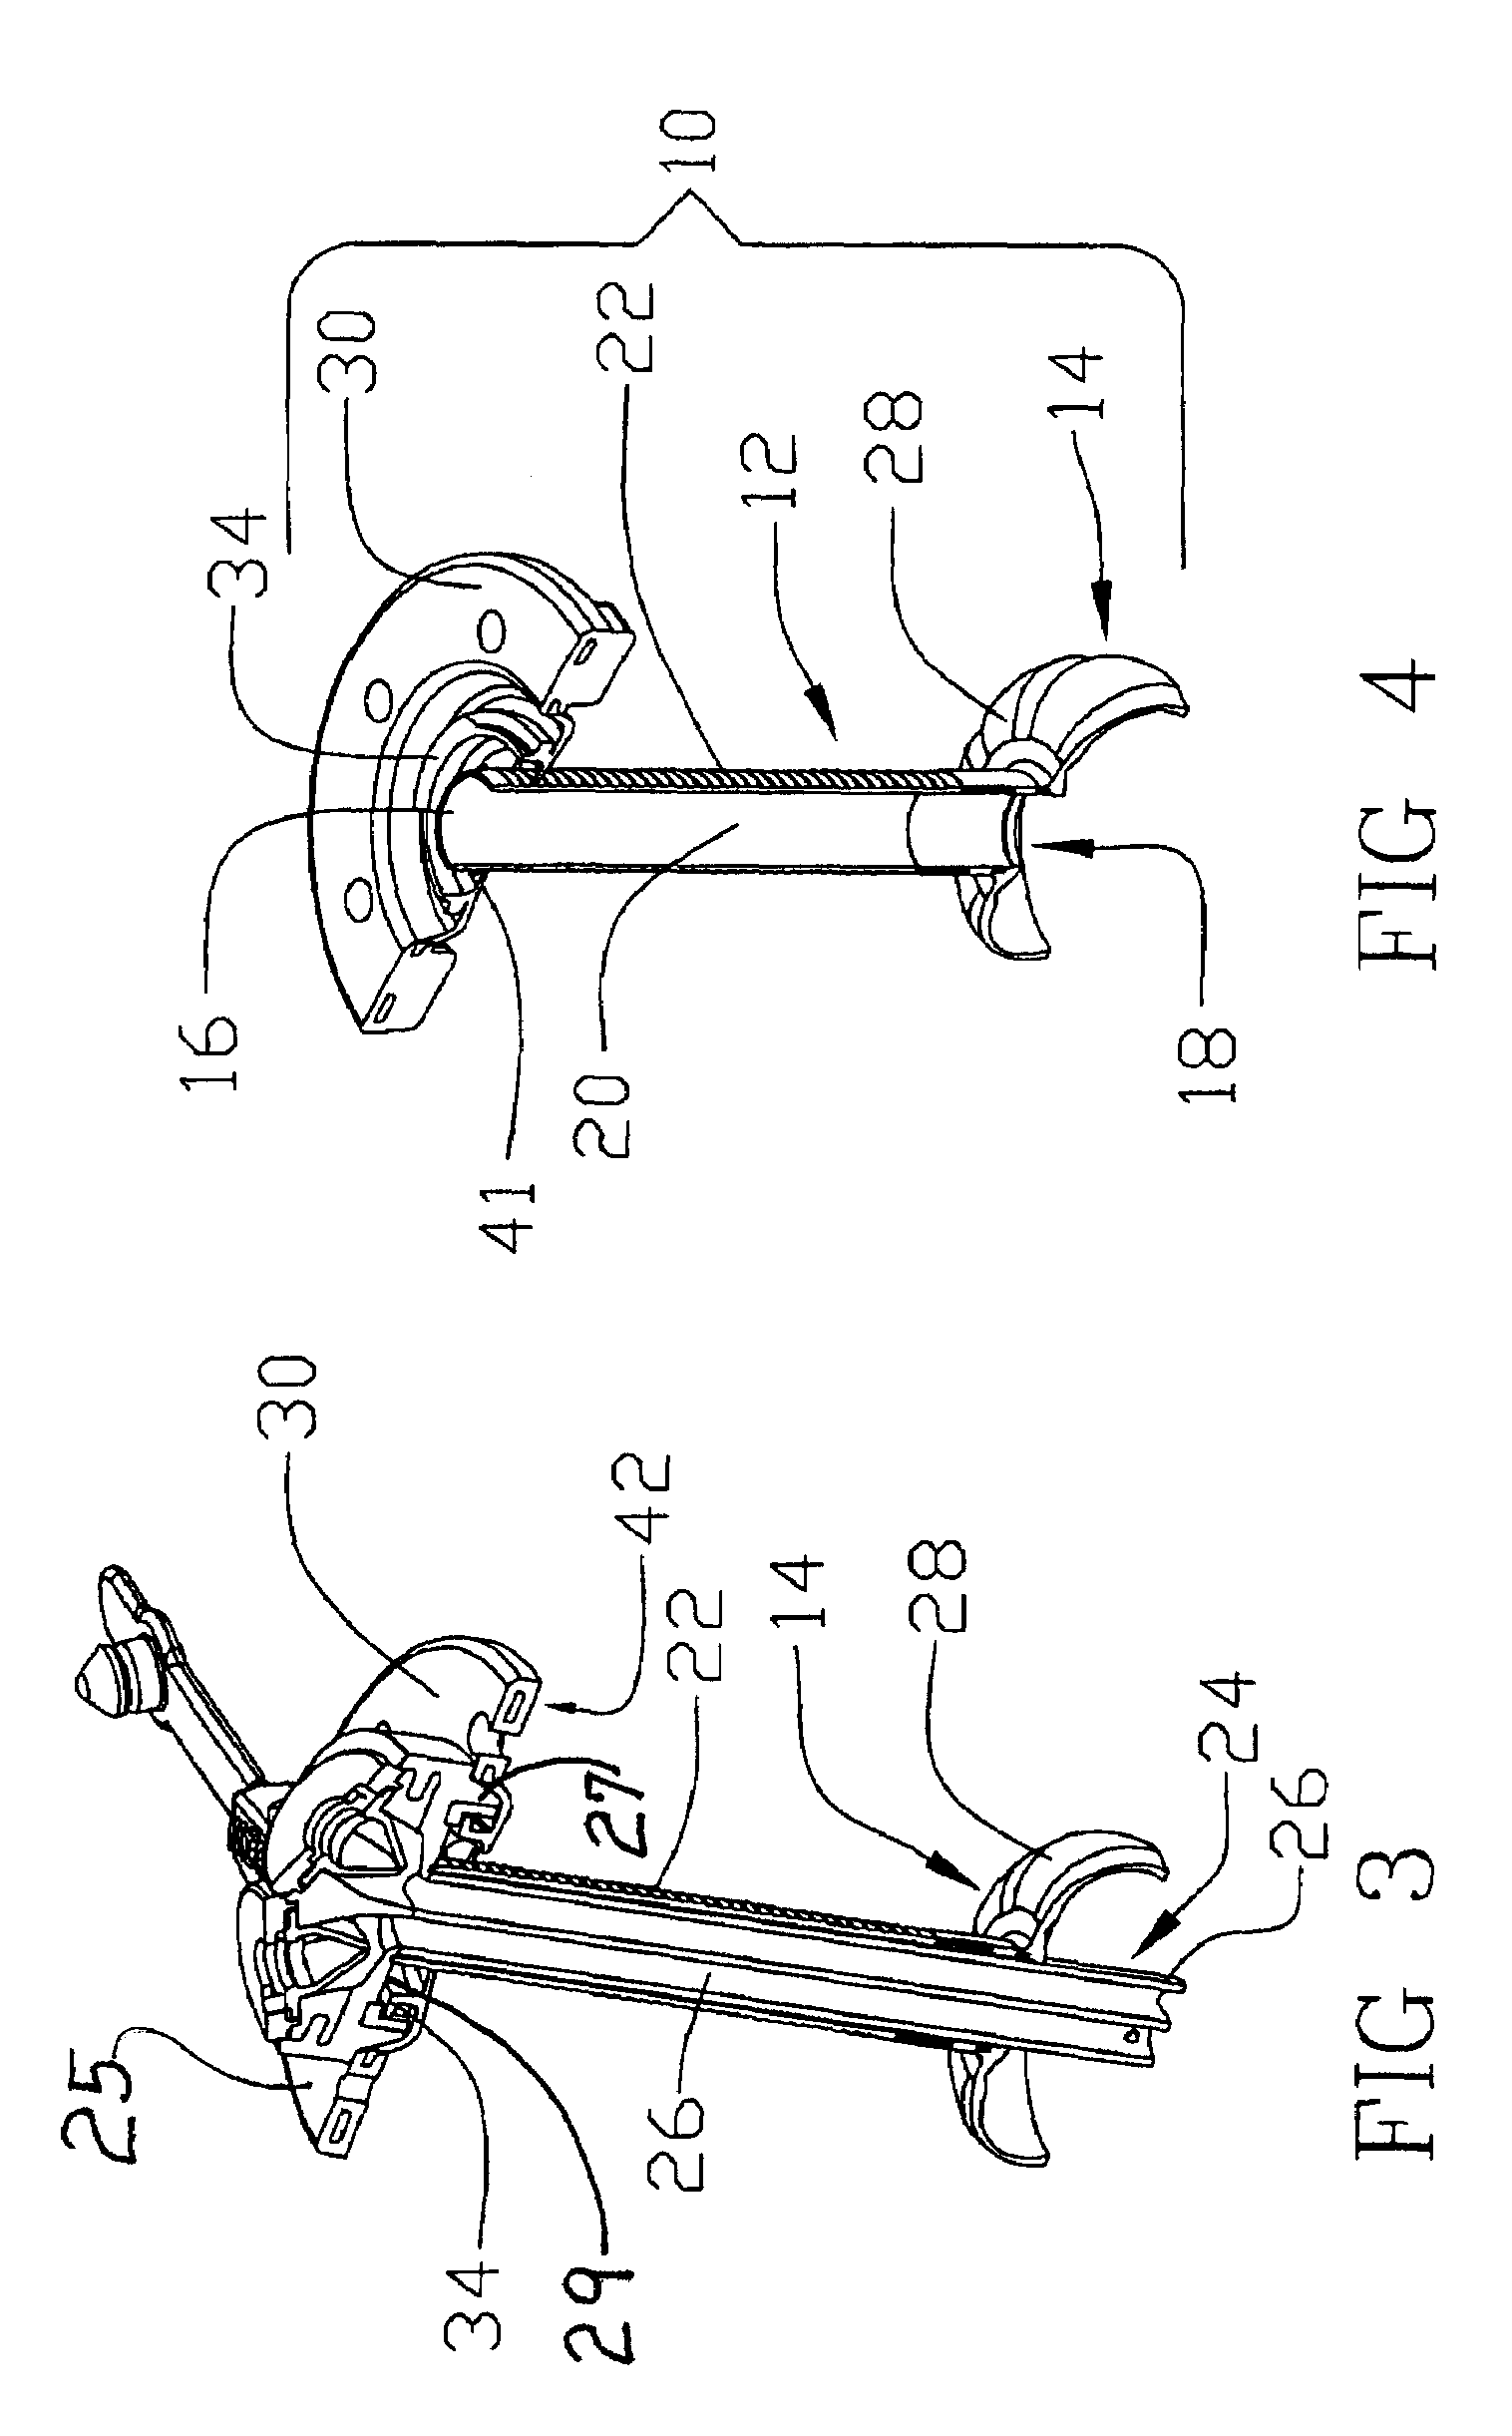 Artificial stoma and method of use